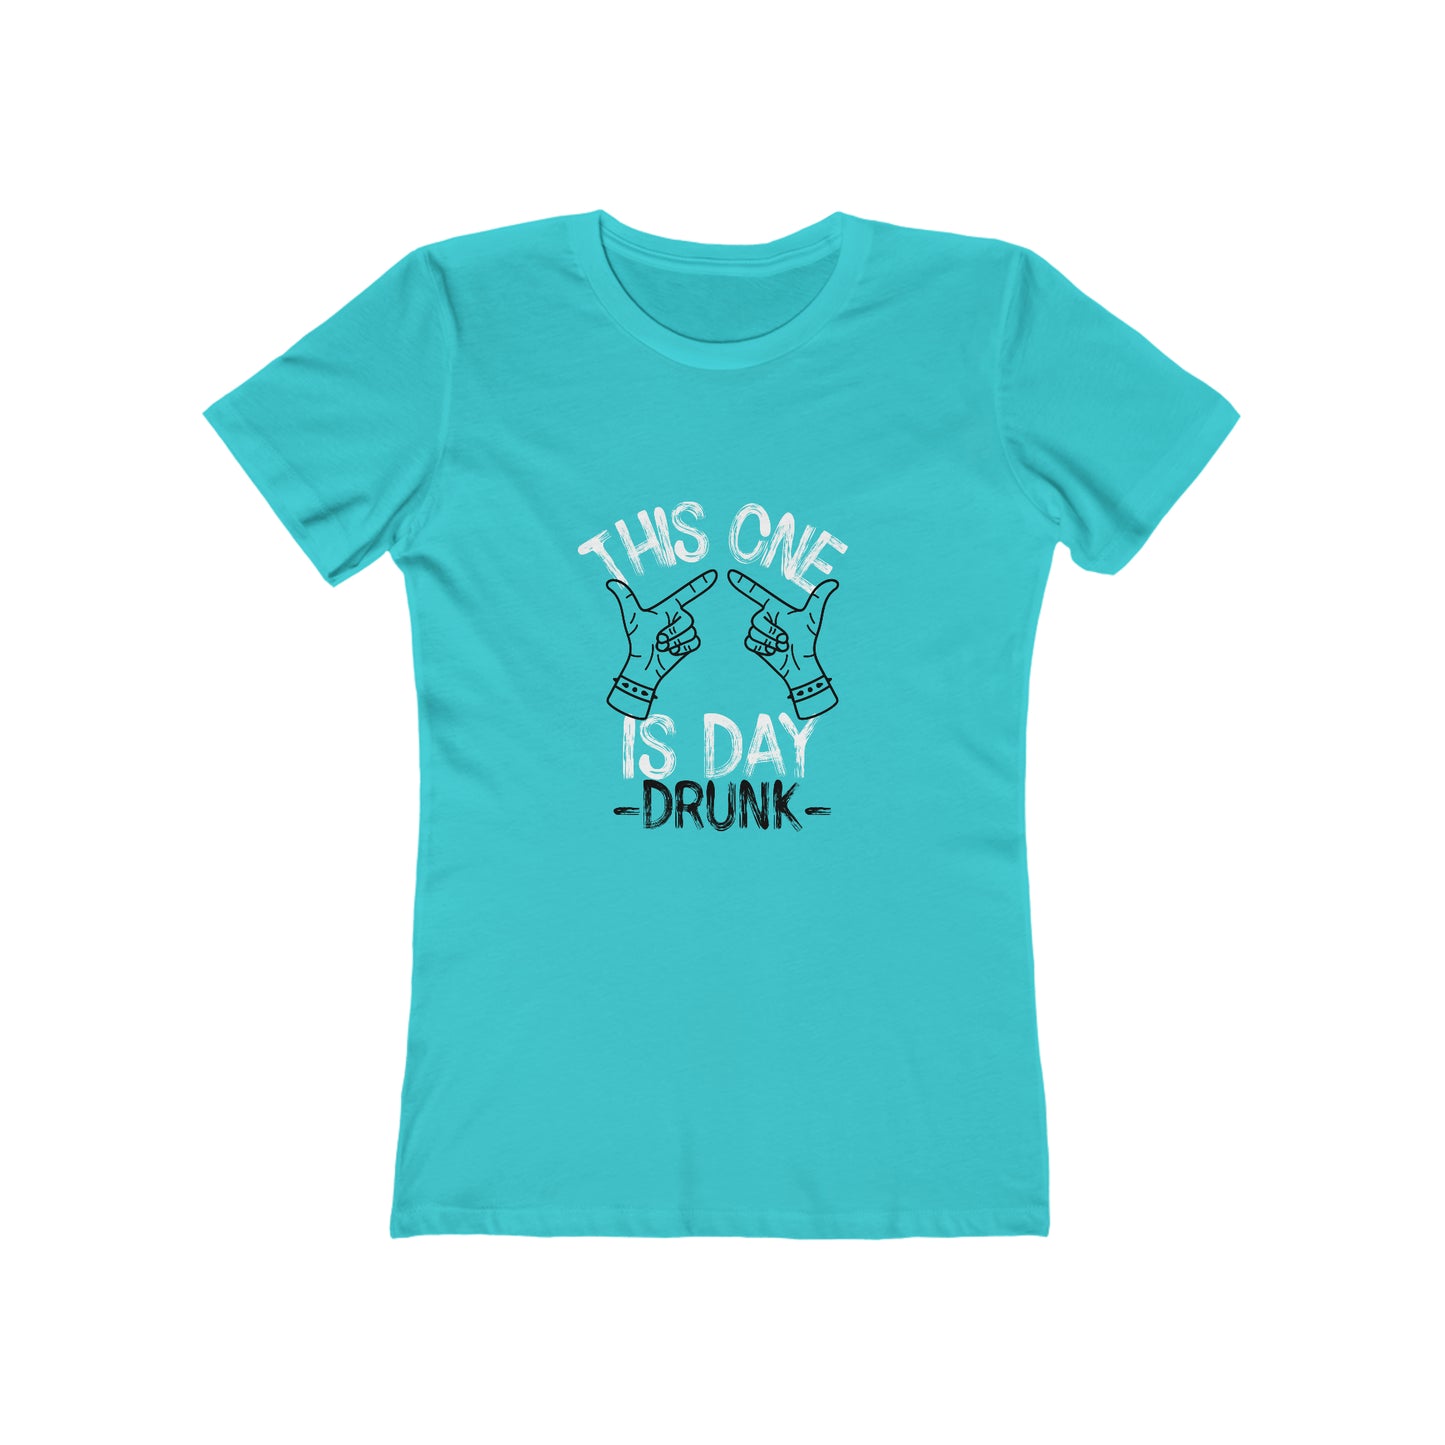 This One Is Day Drunk - Women's T-shirt